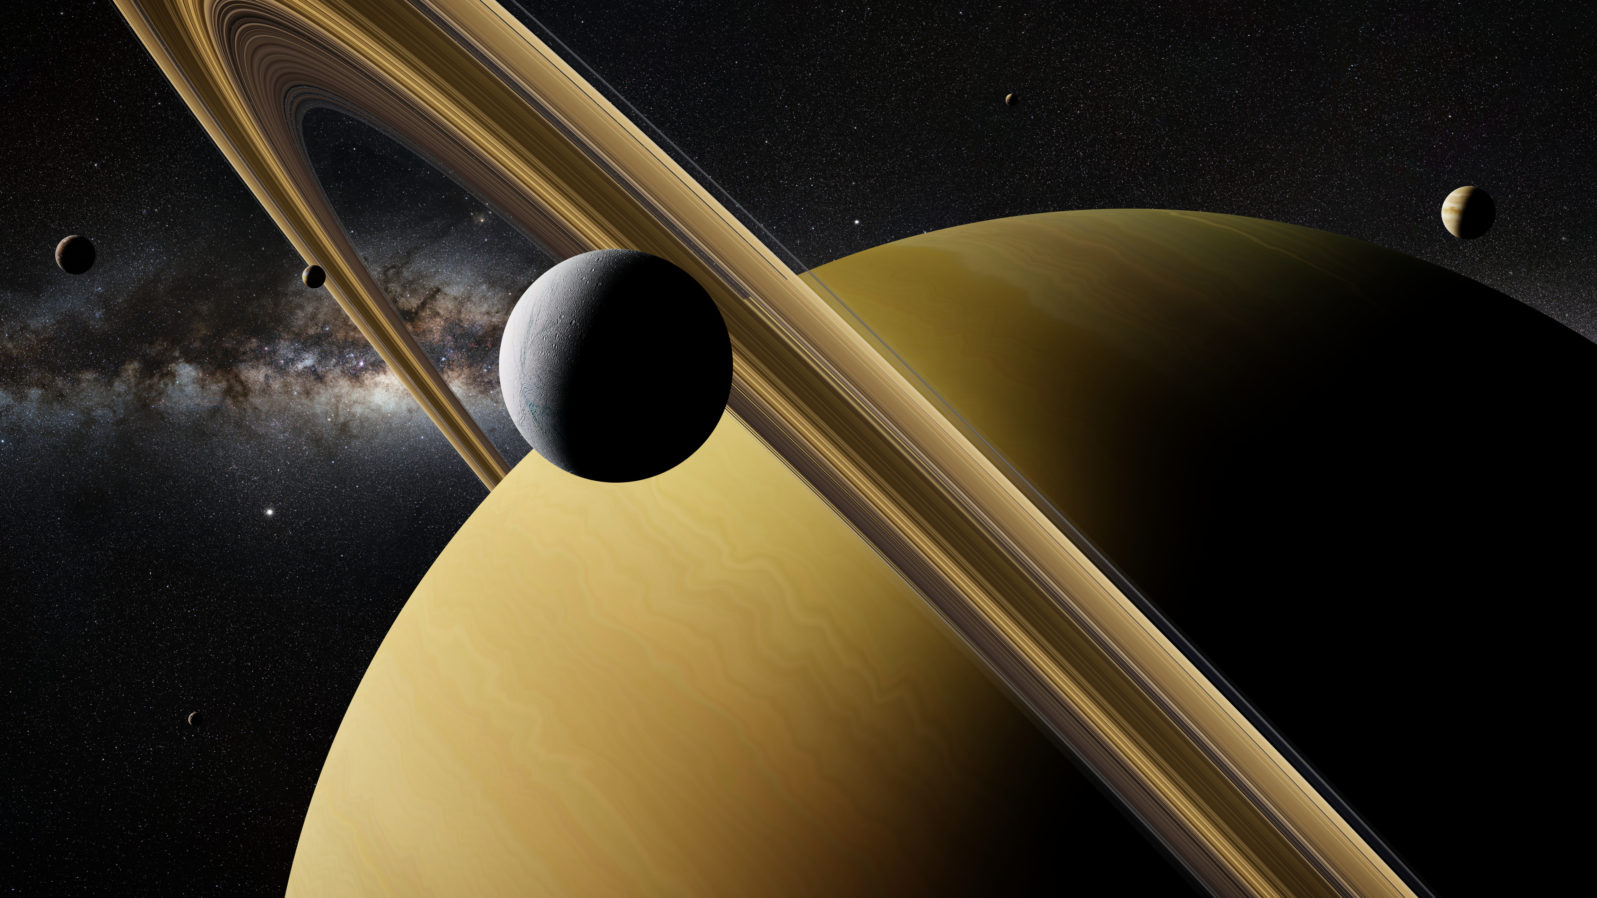 Saturn moon Enceladus in front of planet Saturn, rings, other moons and the Milky Way galaxy